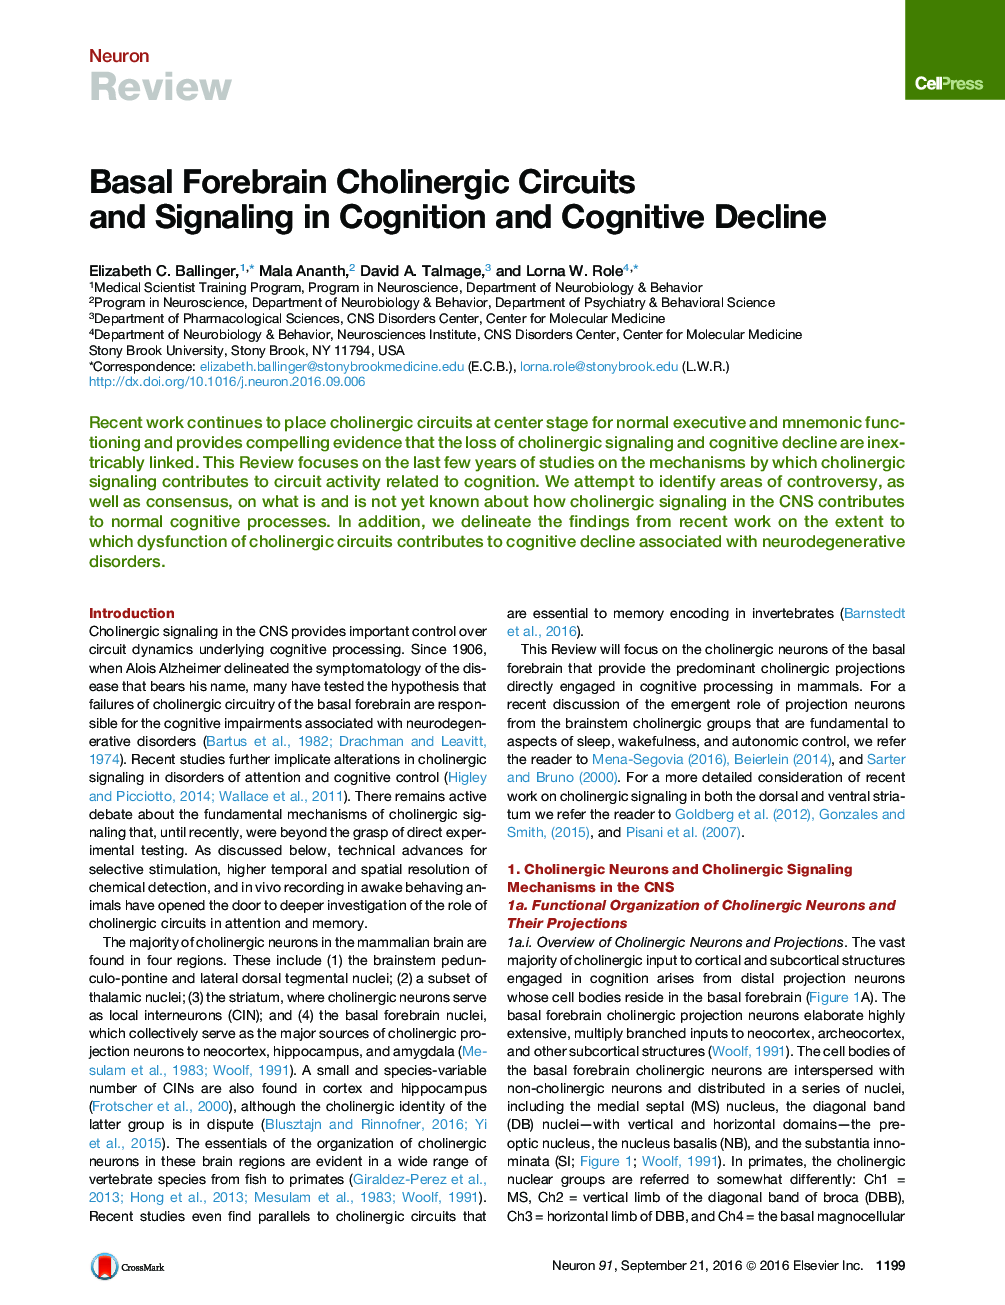 Basal Forebrain Cholinergic Circuits and Signaling in Cognition and Cognitive Decline